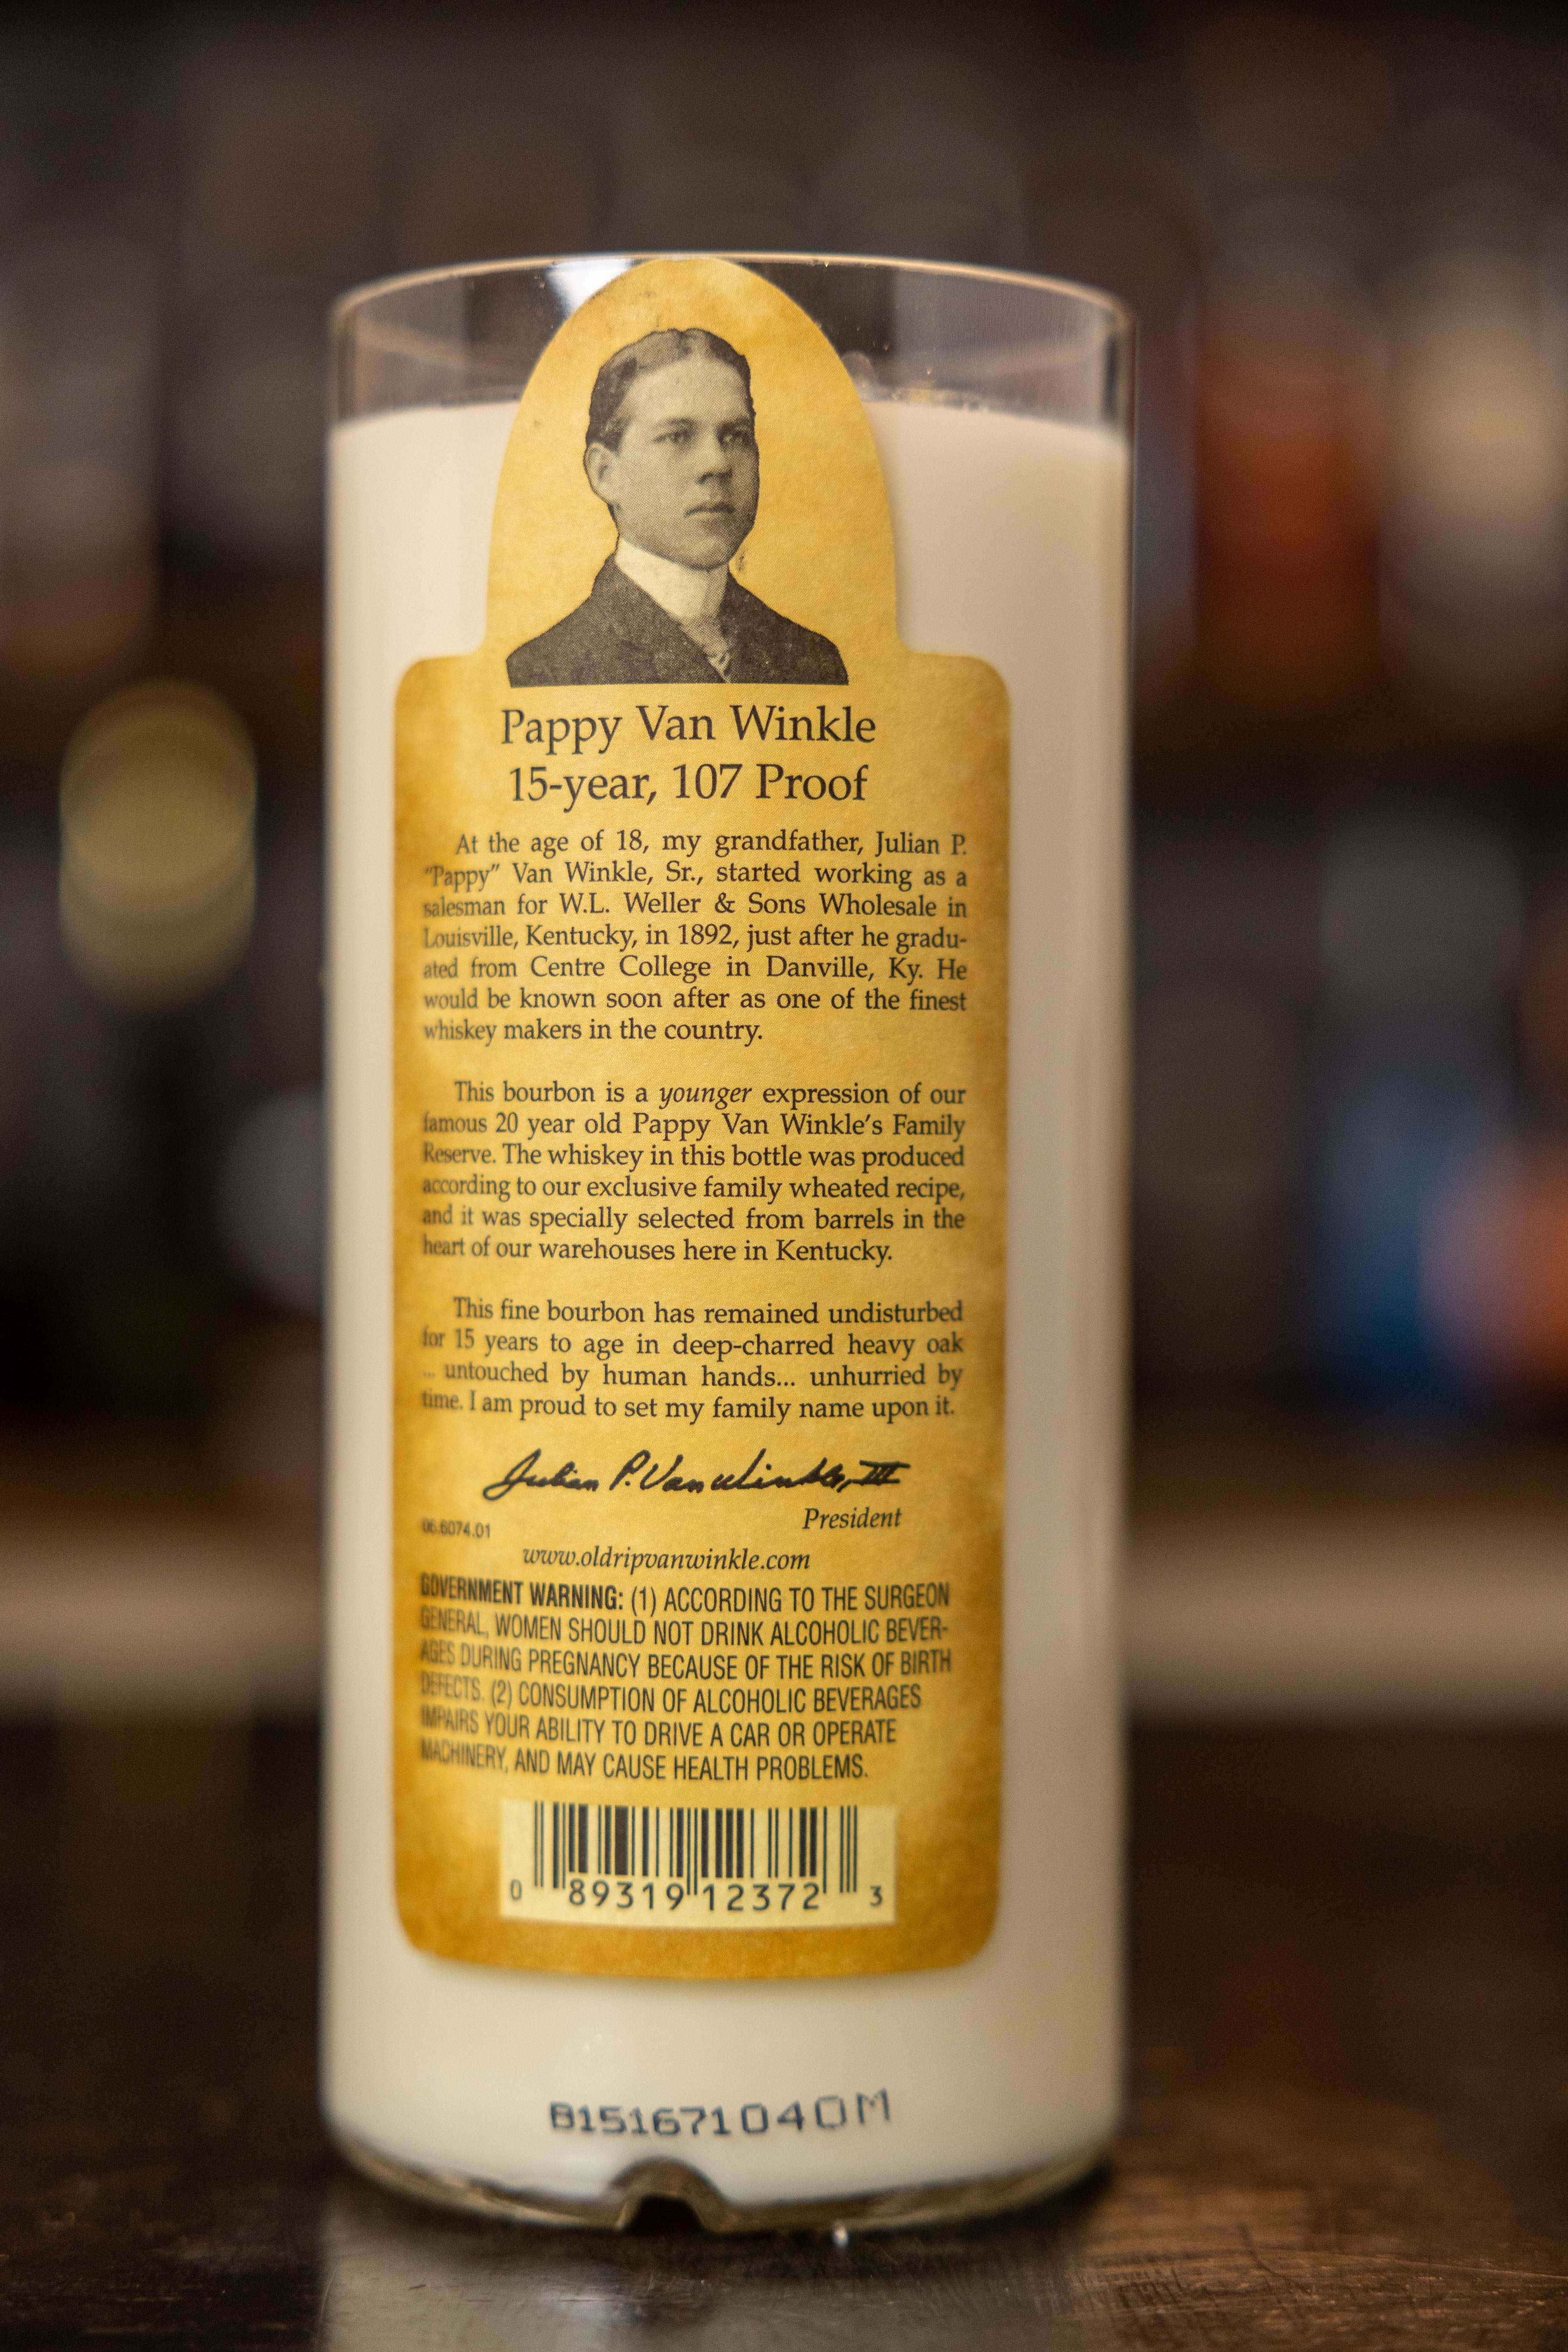 Pappy Van Winkle 15 Year Bottle Candle